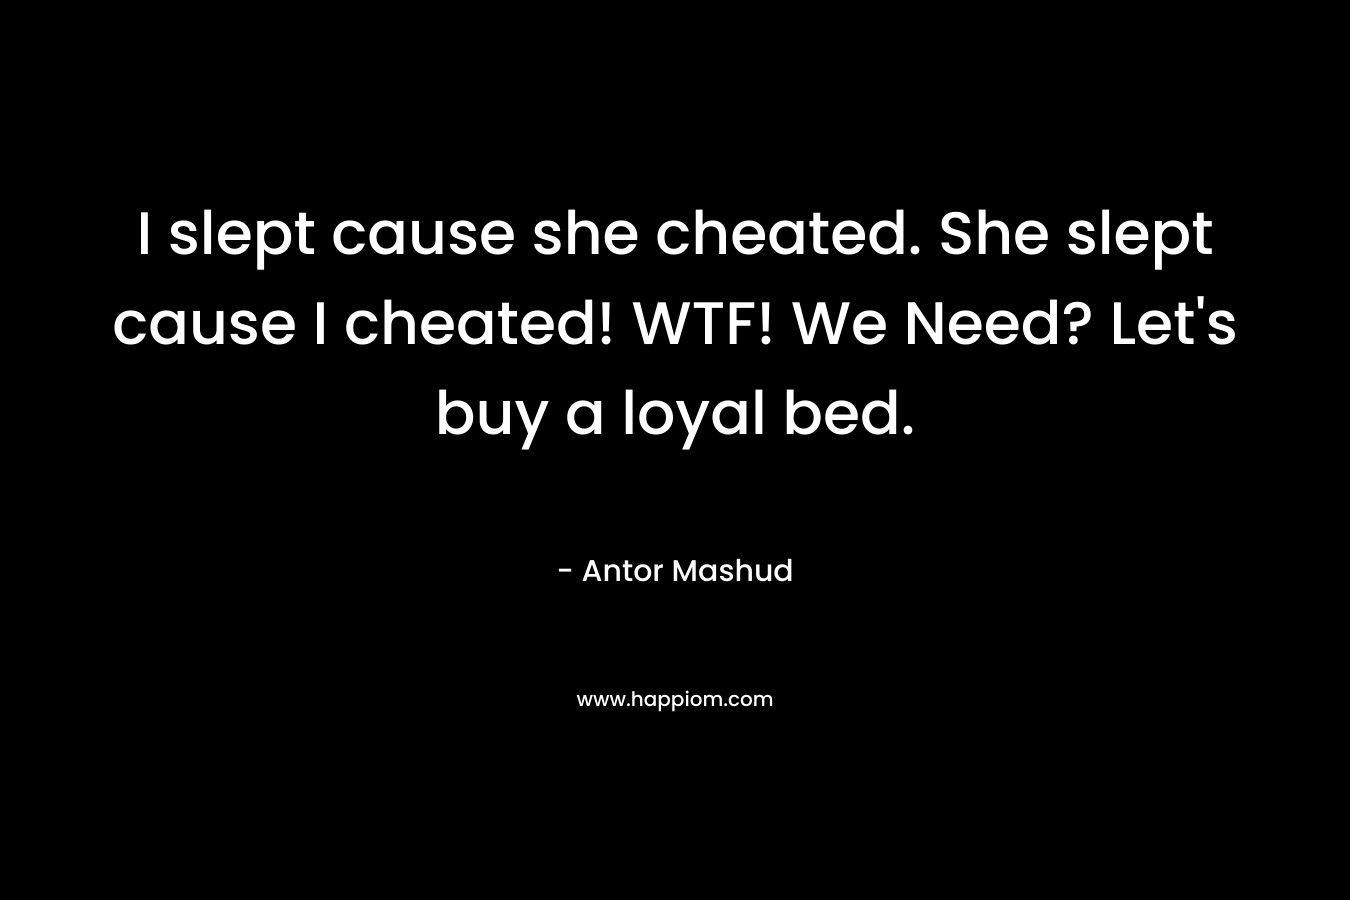 I slept cause she cheated. She slept cause I cheated! WTF! We Need? Let's buy a loyal bed.